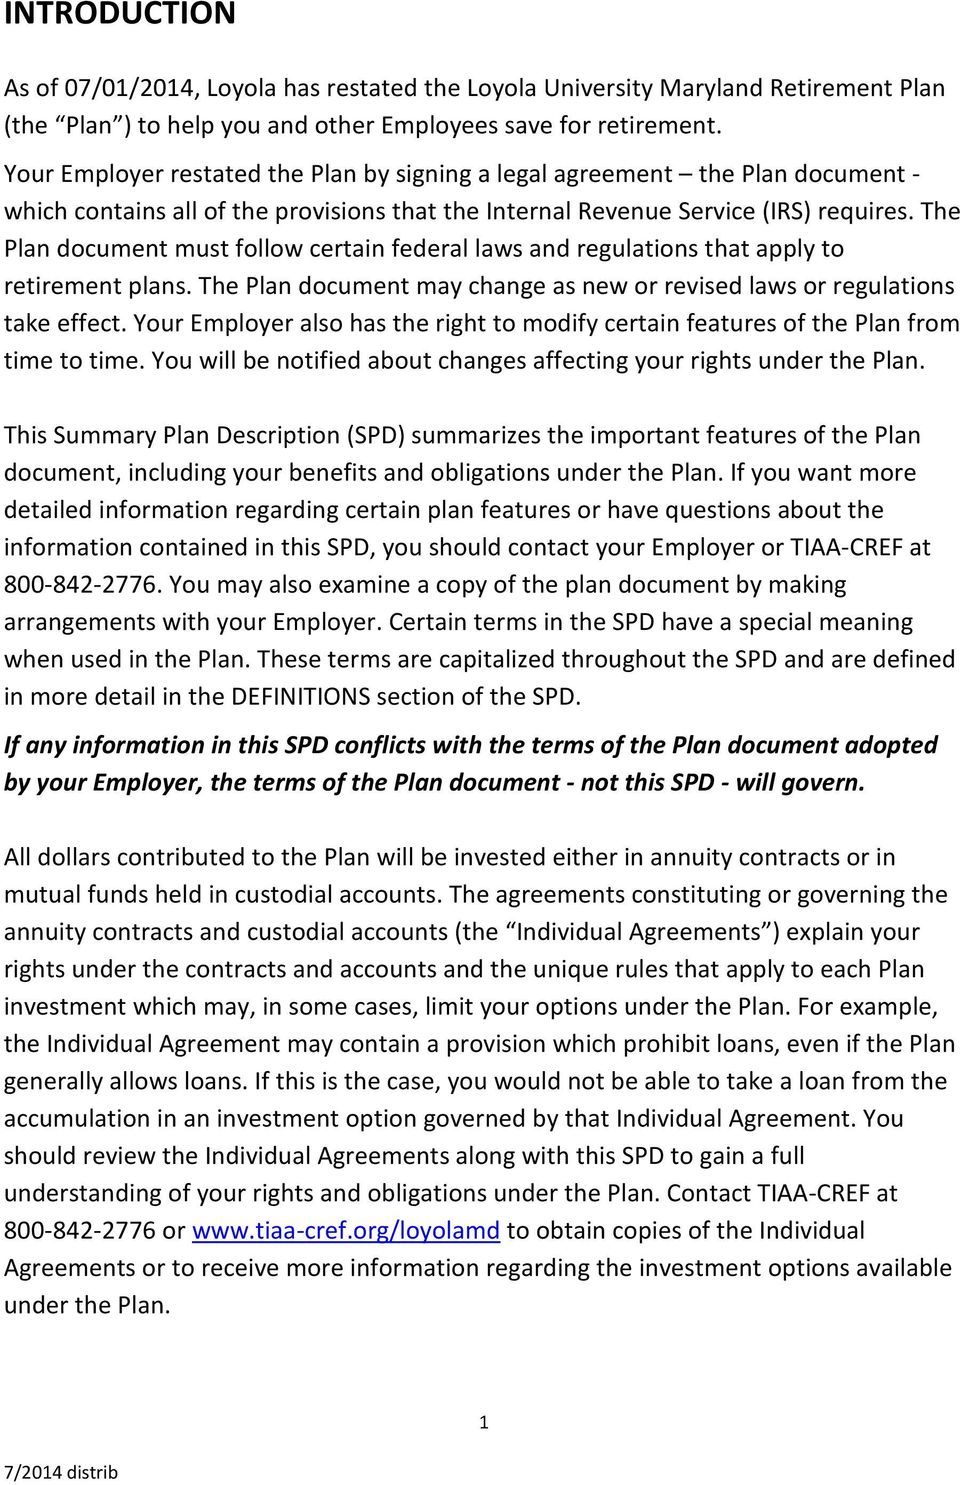 The Plan document must follow certain federal laws and regulations that apply to retirement plans. The Plan document may change as new or revised laws or regulations take effect.